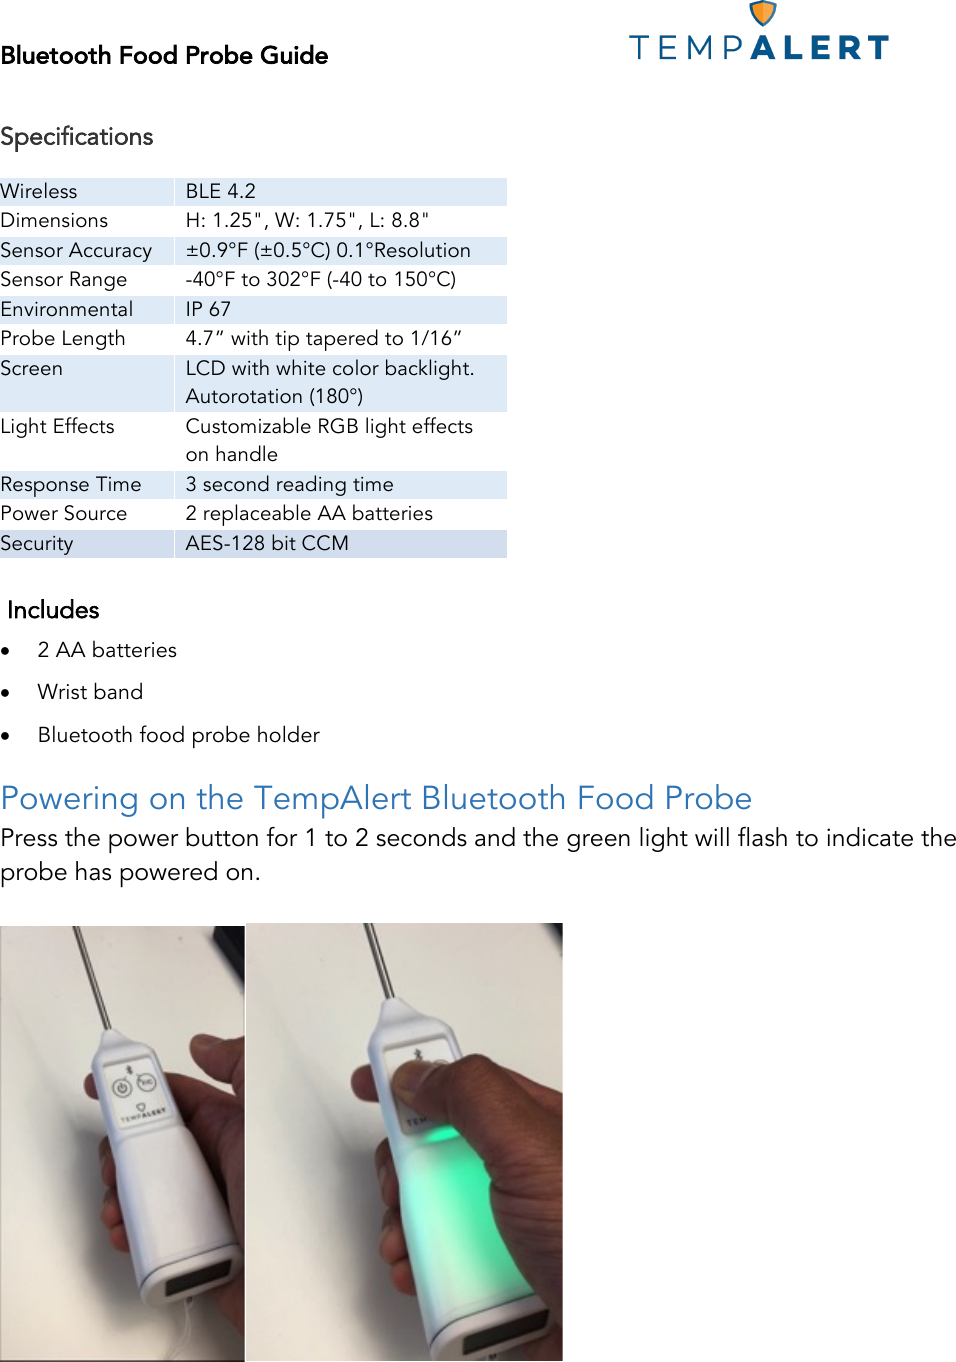 Bluetooth Food Probe Guide!!!!!!!!!!!!!!!!!!!!!!!!!!!!!!!!!!!!!!!!!!!!!!!!!!!!! ! Specifications  Wireless BLE 4.2 Dimensions H: 1.25&quot;, W: 1.75&quot;, L: 8.8&quot; Sensor Accuracy ±0.9°F (±0.5°C) 0.1°Resolution  Sensor Range -40°F to 302°F (-40 to 150°C) Environmental IP 67 Probe Length 4.7” with tip tapered to 1/16”  Screen LCD with white color backlight. Autorotation (180°) Light Effects Customizable RGB light effects on handle Response Time 3 second reading time Power Source 2 replaceable AA batteries Security AES-128 bit CCM   Includes  • 2 AA batteries • Wrist band • Bluetooth food probe holder Powering on the TempAlert Bluetooth Food Probe  Press the power button for 1 to 2 seconds and the green light will flash to indicate the probe has powered on.   !!